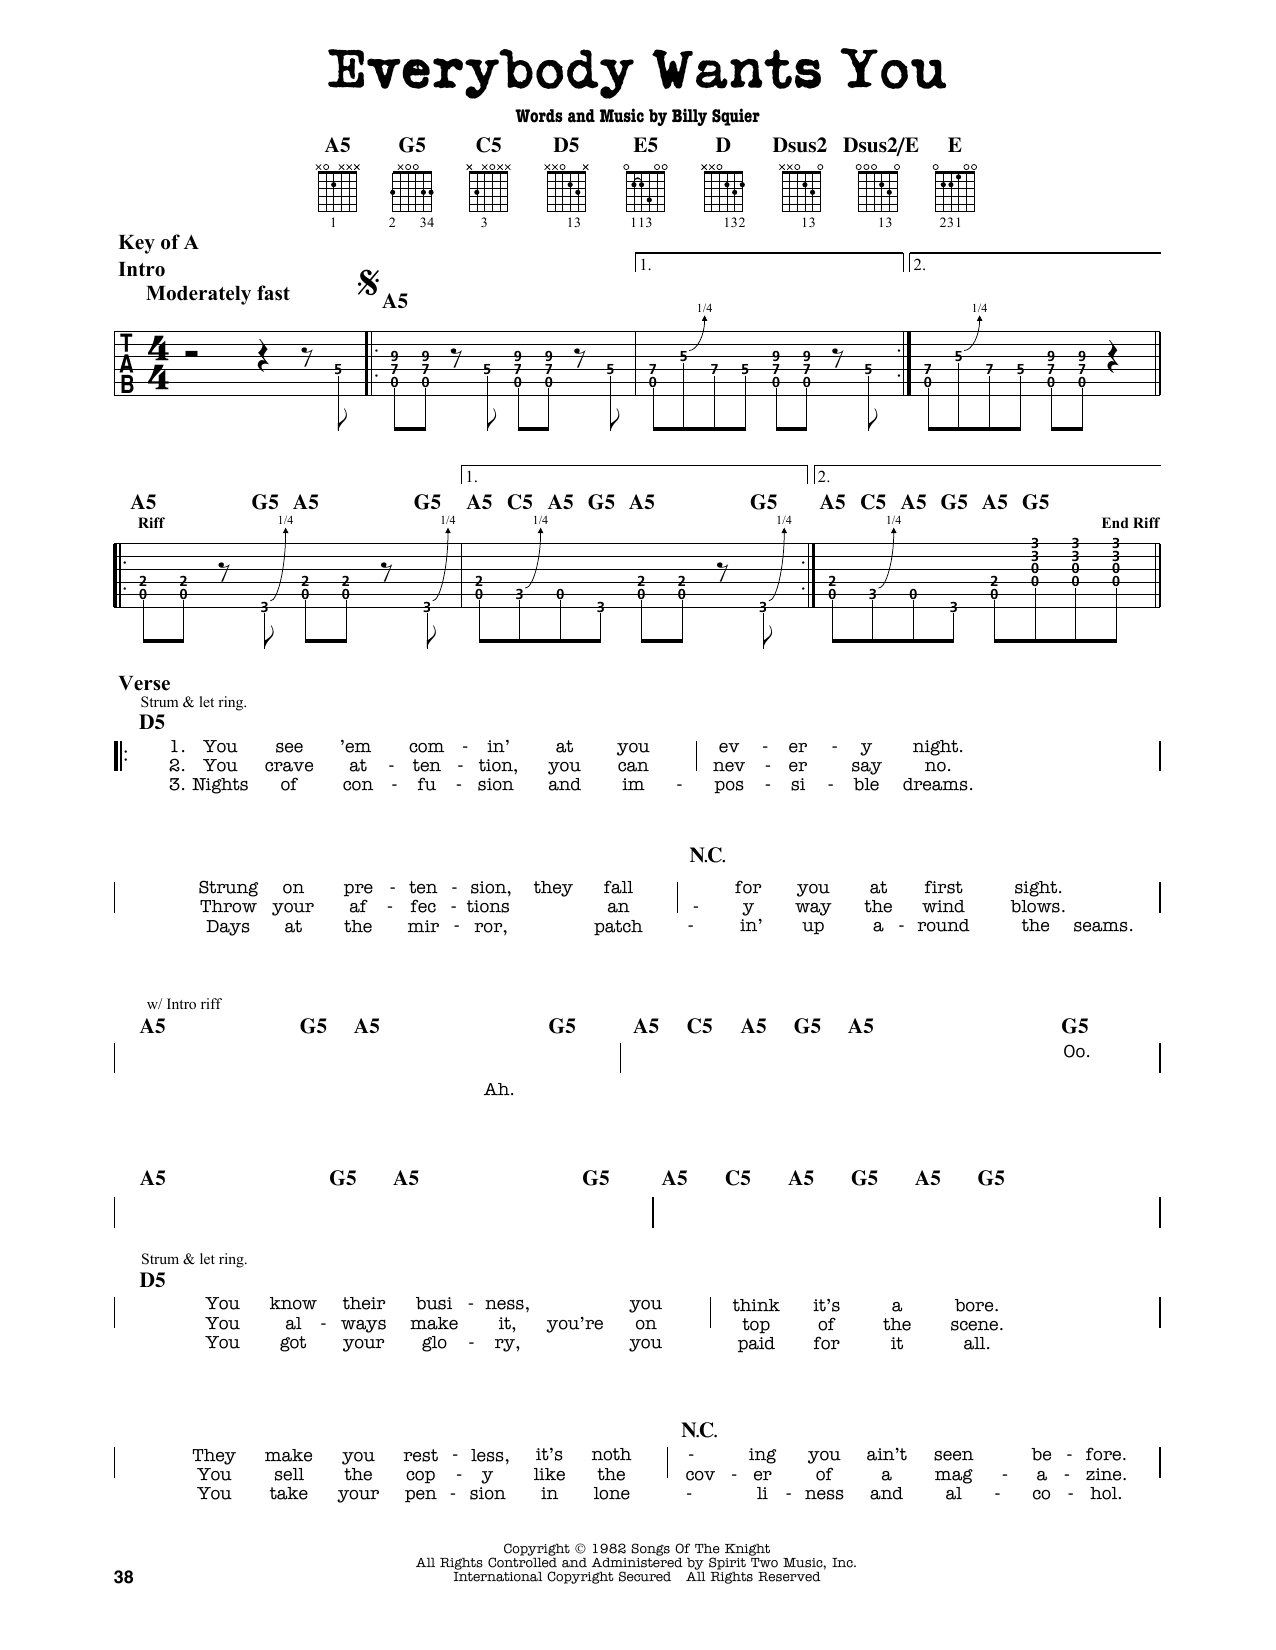 Download Billy Squier Everybody Wants You Sheet Music